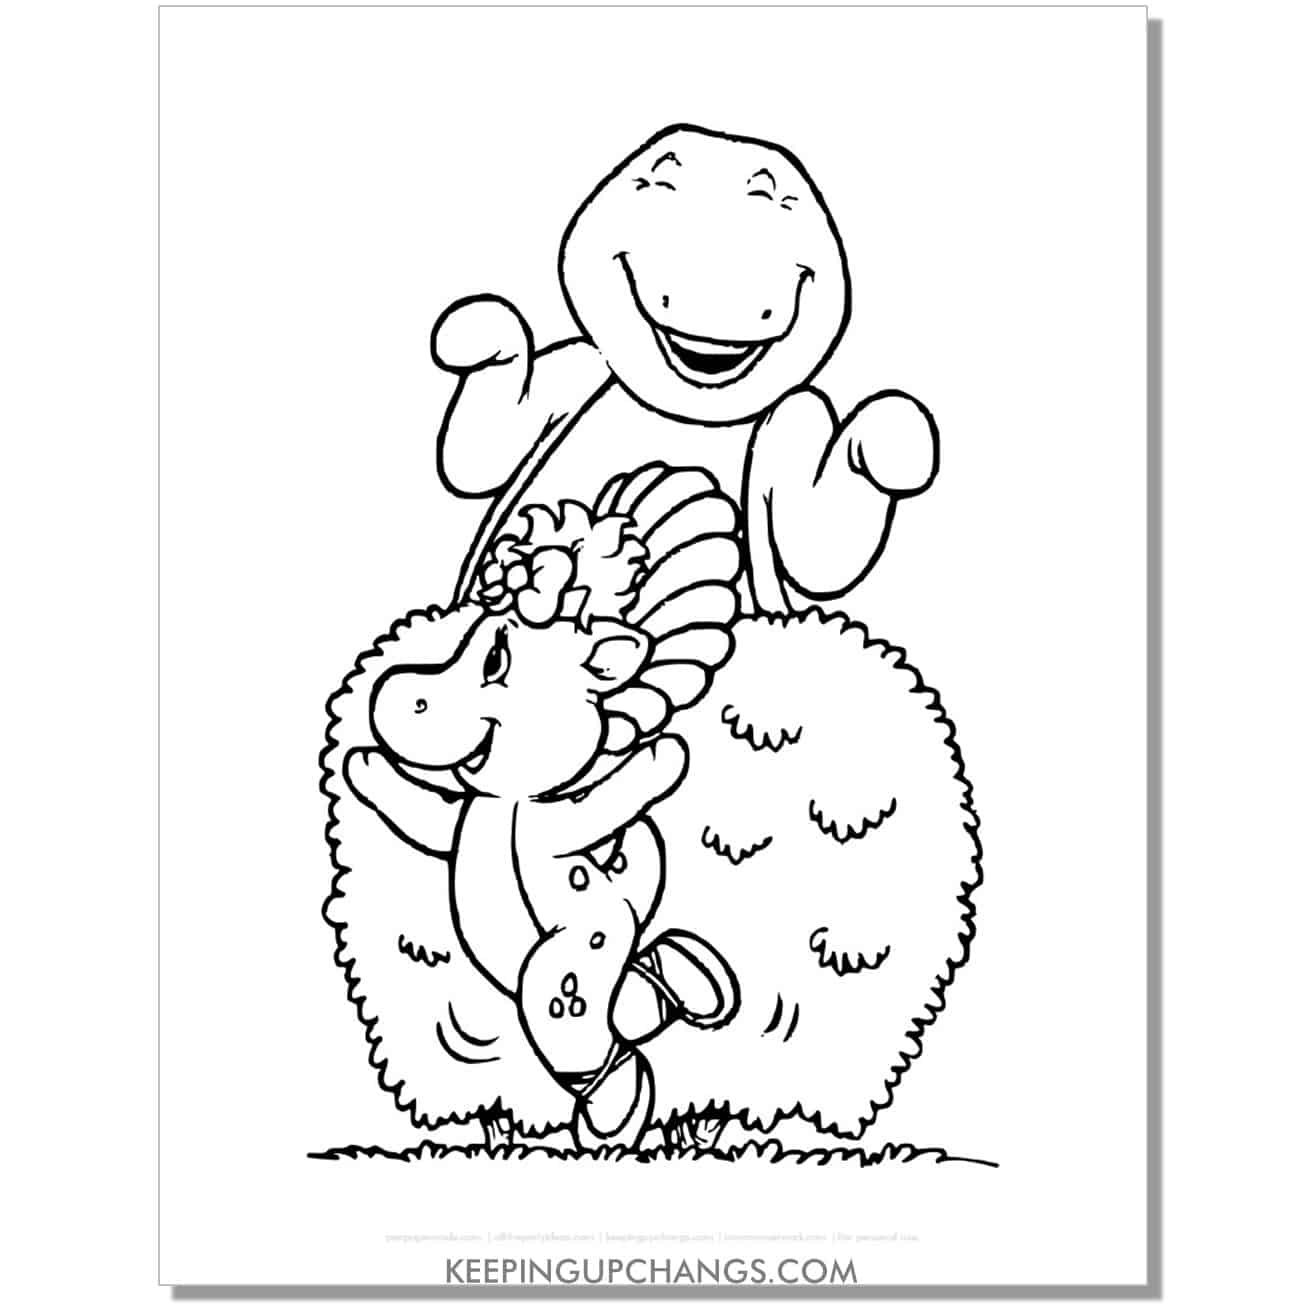 free barney and baby bop dancing around bush coloring page, sheet.